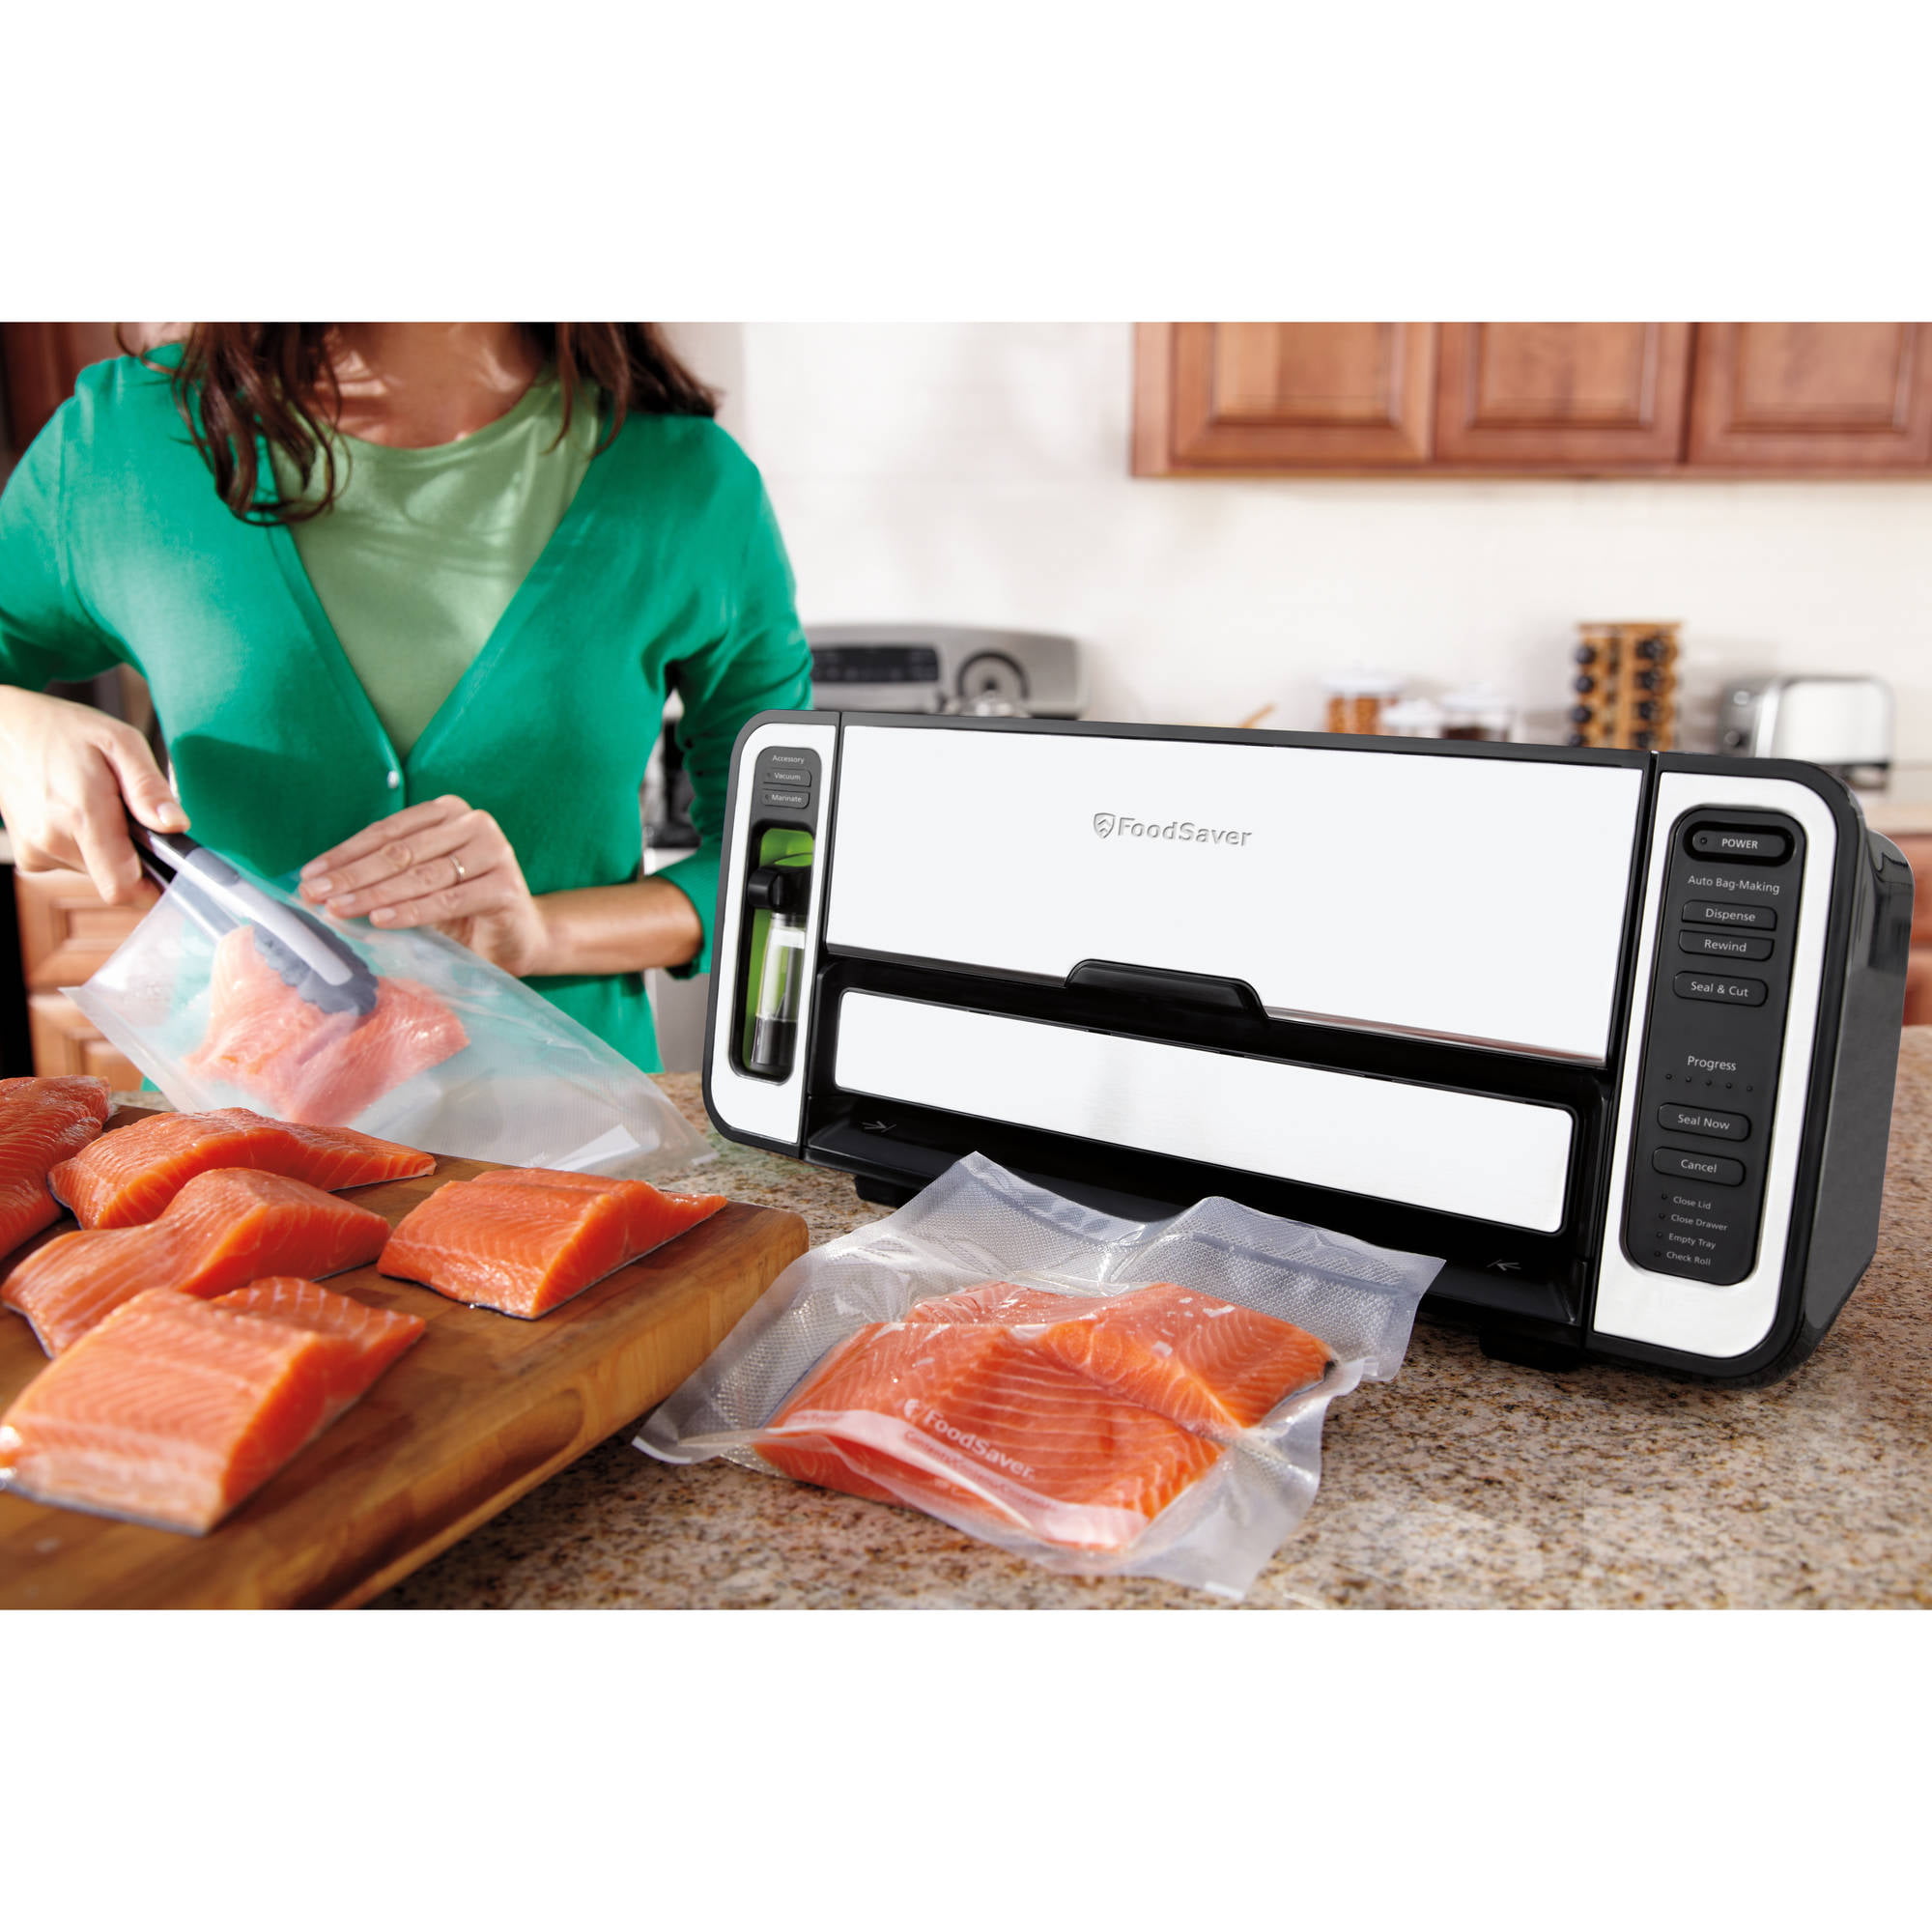 W-RACK12:Vacuum Sealer Machine, with Starter Kit and 2-Year Warranty,  Beelicious Automatic Air Sealing System for Food Storage, with Build-in  Cutter, Moist Mode, Air Suction Hose, LED Indicator, Quiet, 50% Compact